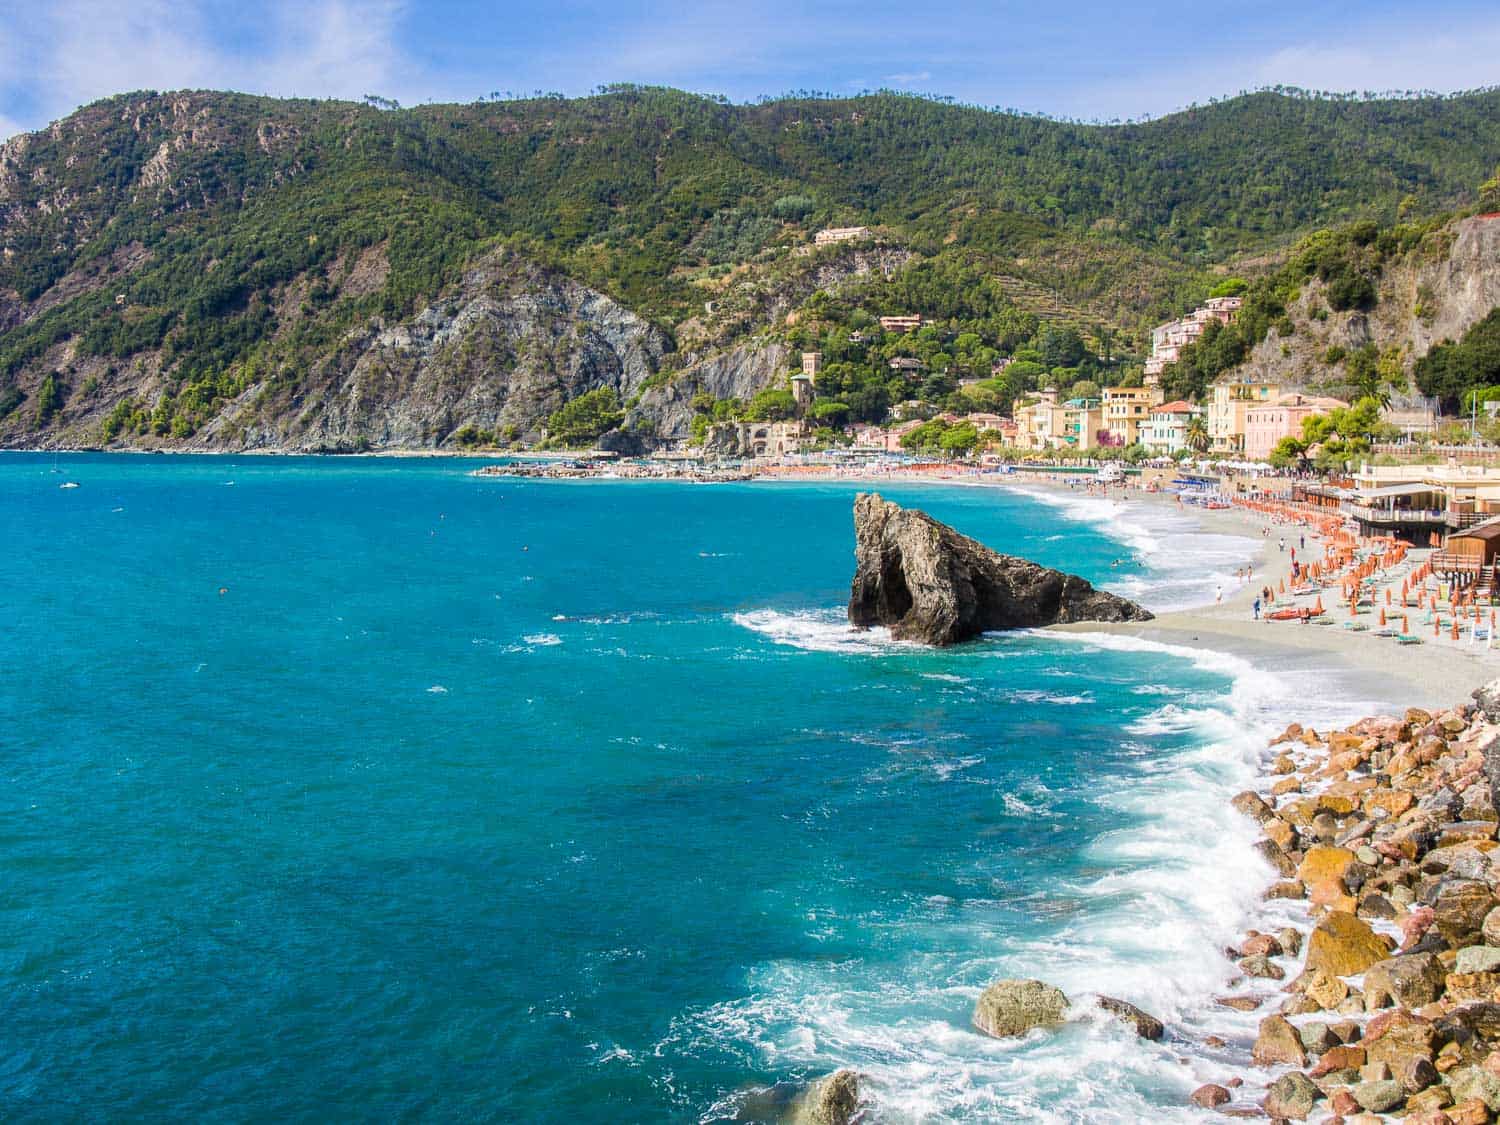 Hiking to Monterosso in Cinque Terre was one of the highlights of our Interrail trip around Europe